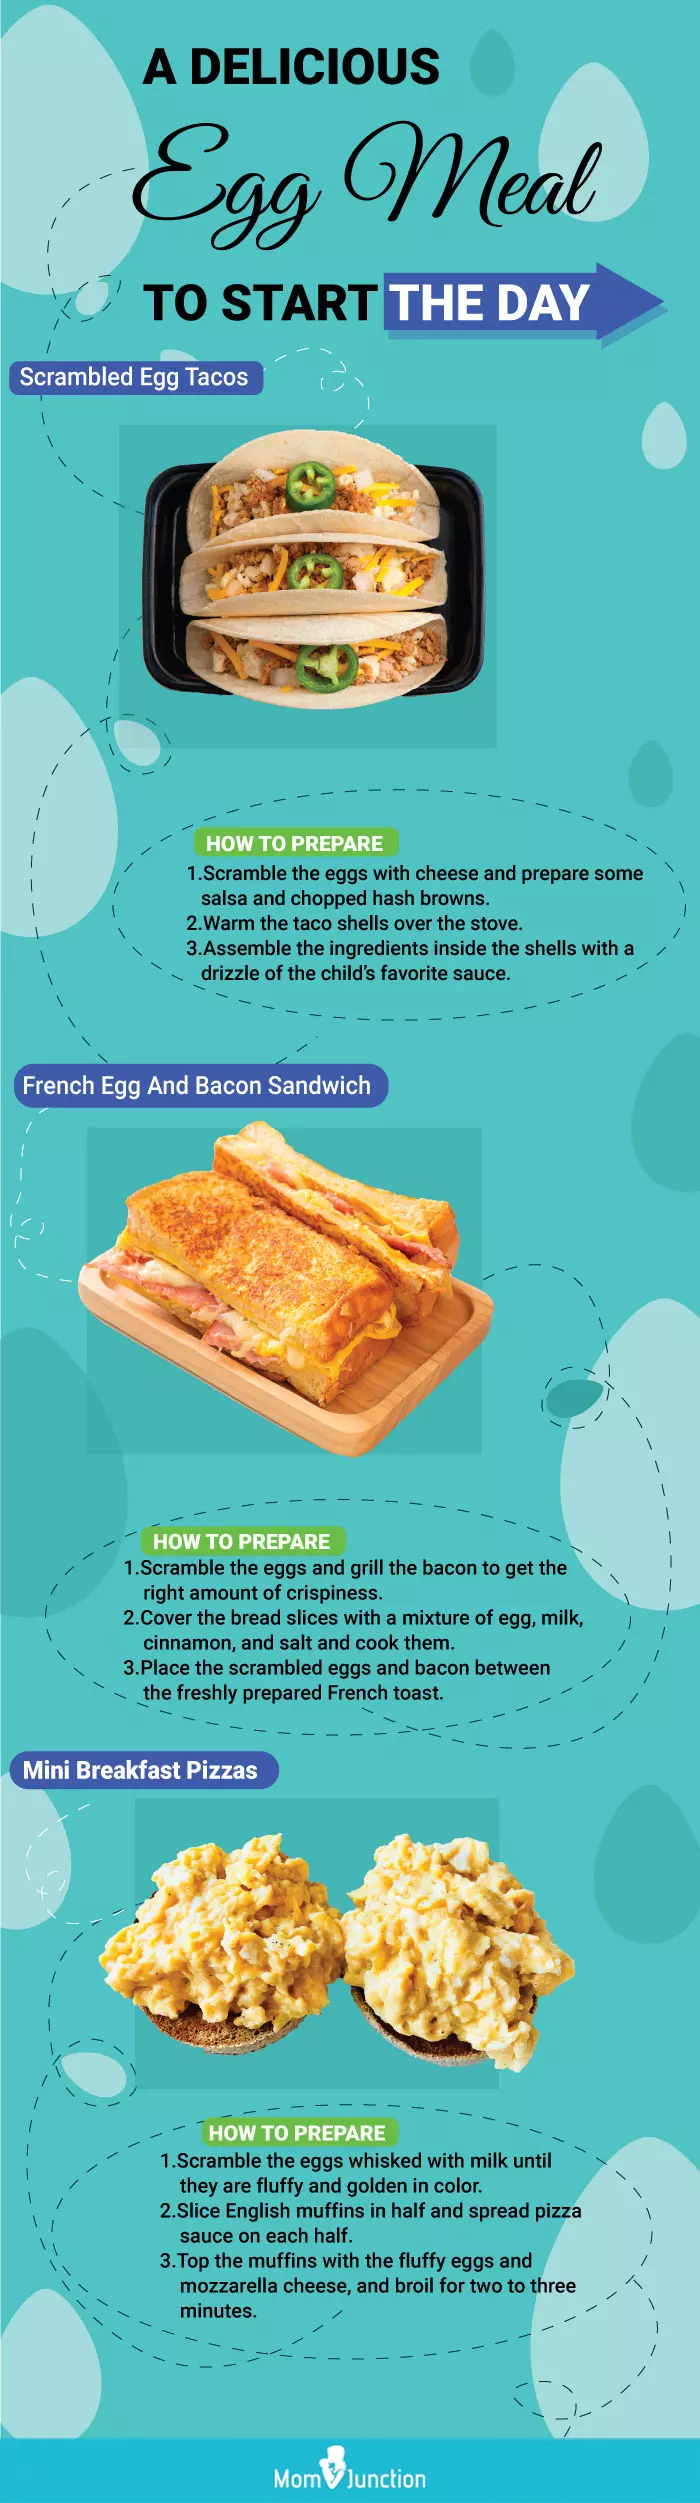 egg recipes for a wholesome breakfast for kids(infographic)